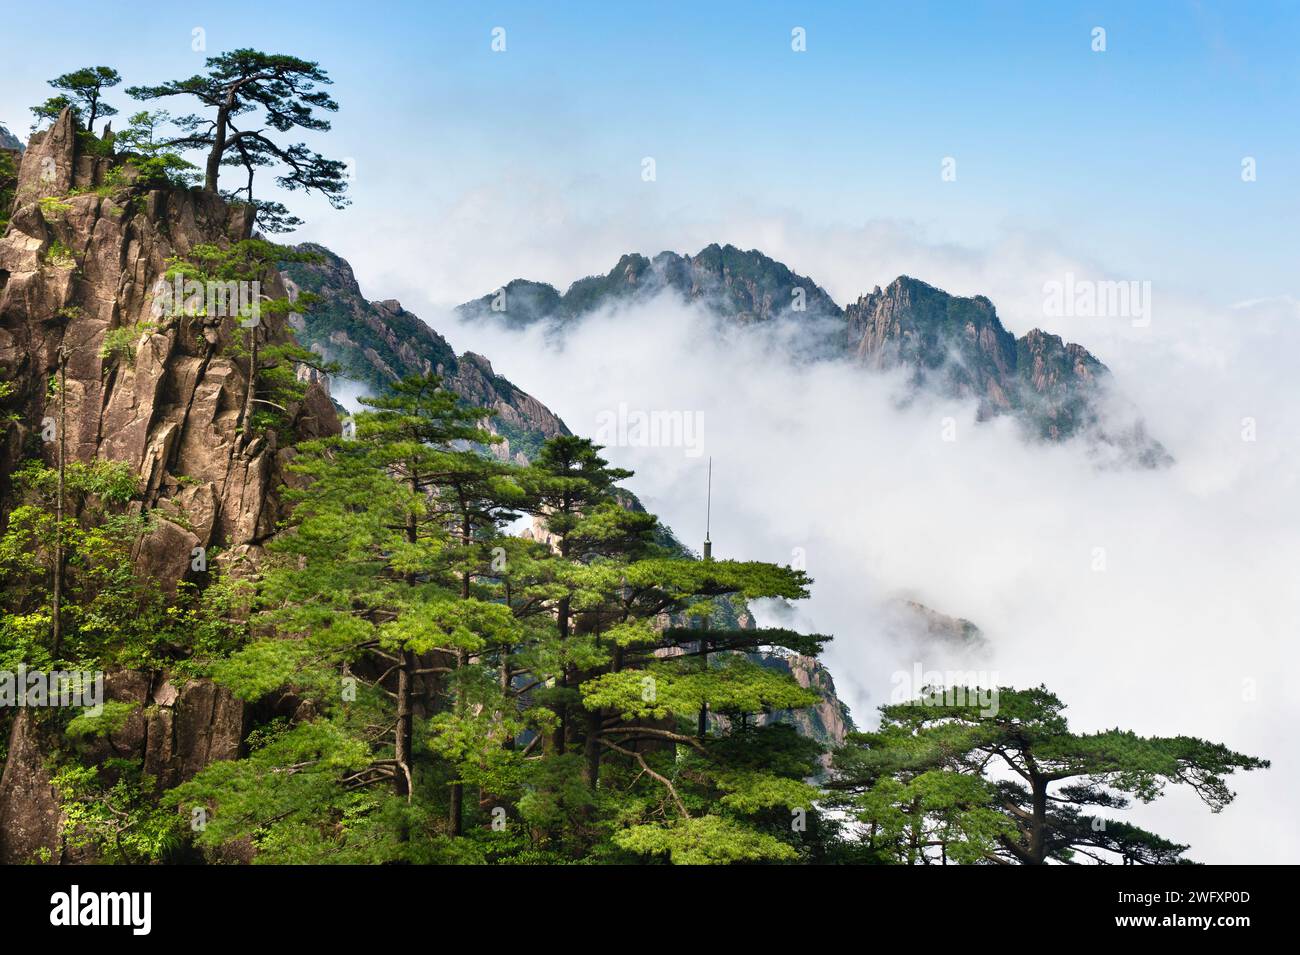 Clouds floats amidst the North Sea area of Huangshan Yellow Mountains. Stock Photo